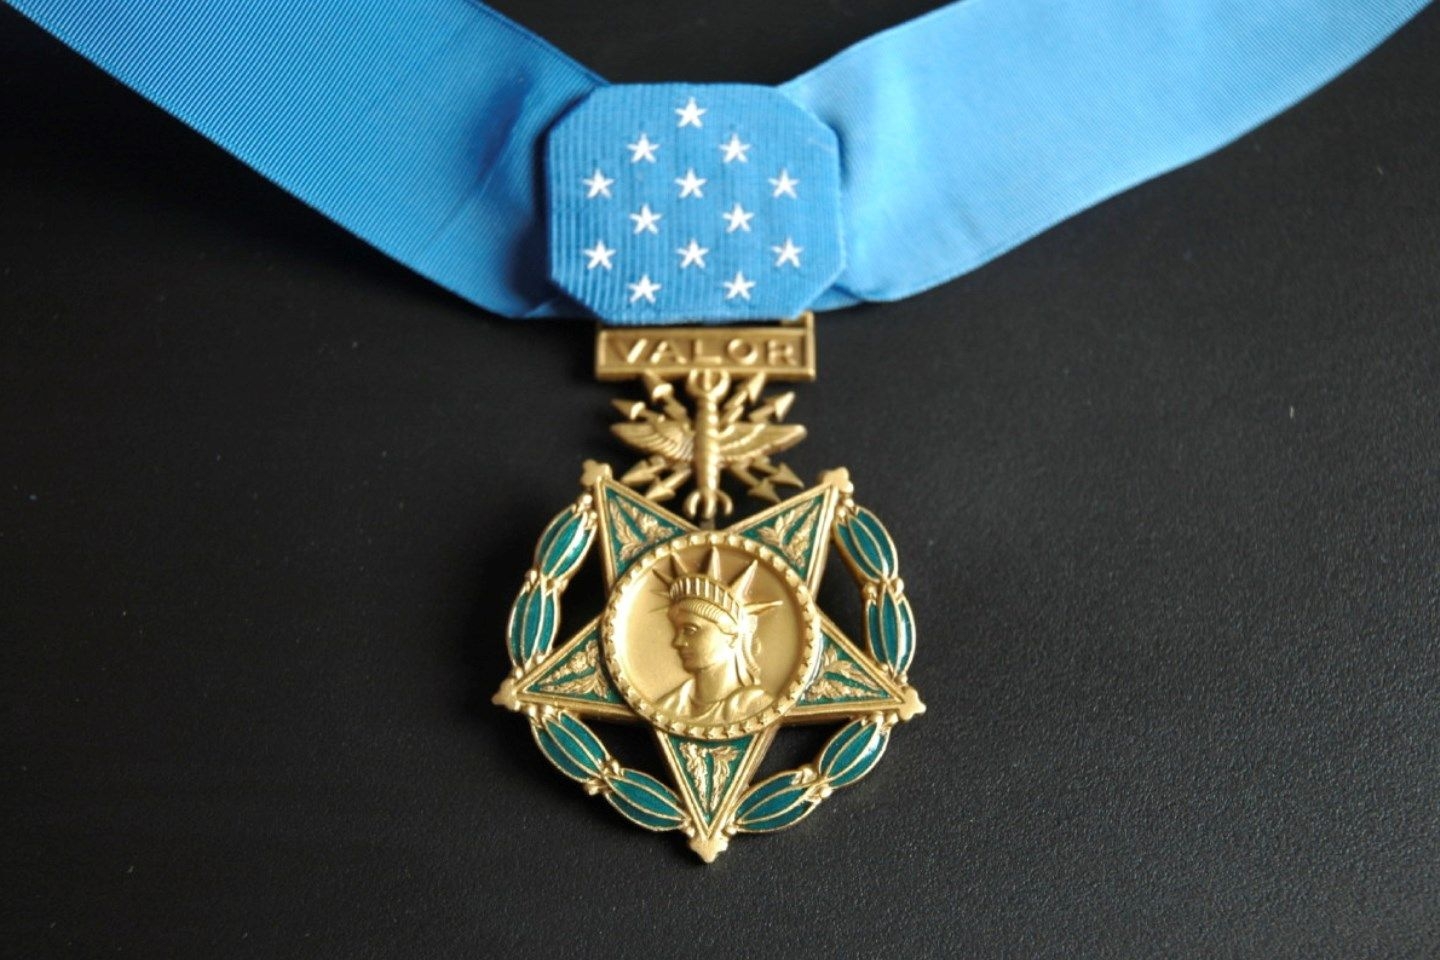 https://www.history.com/news/has-anyone-won-two-medals-of-honor